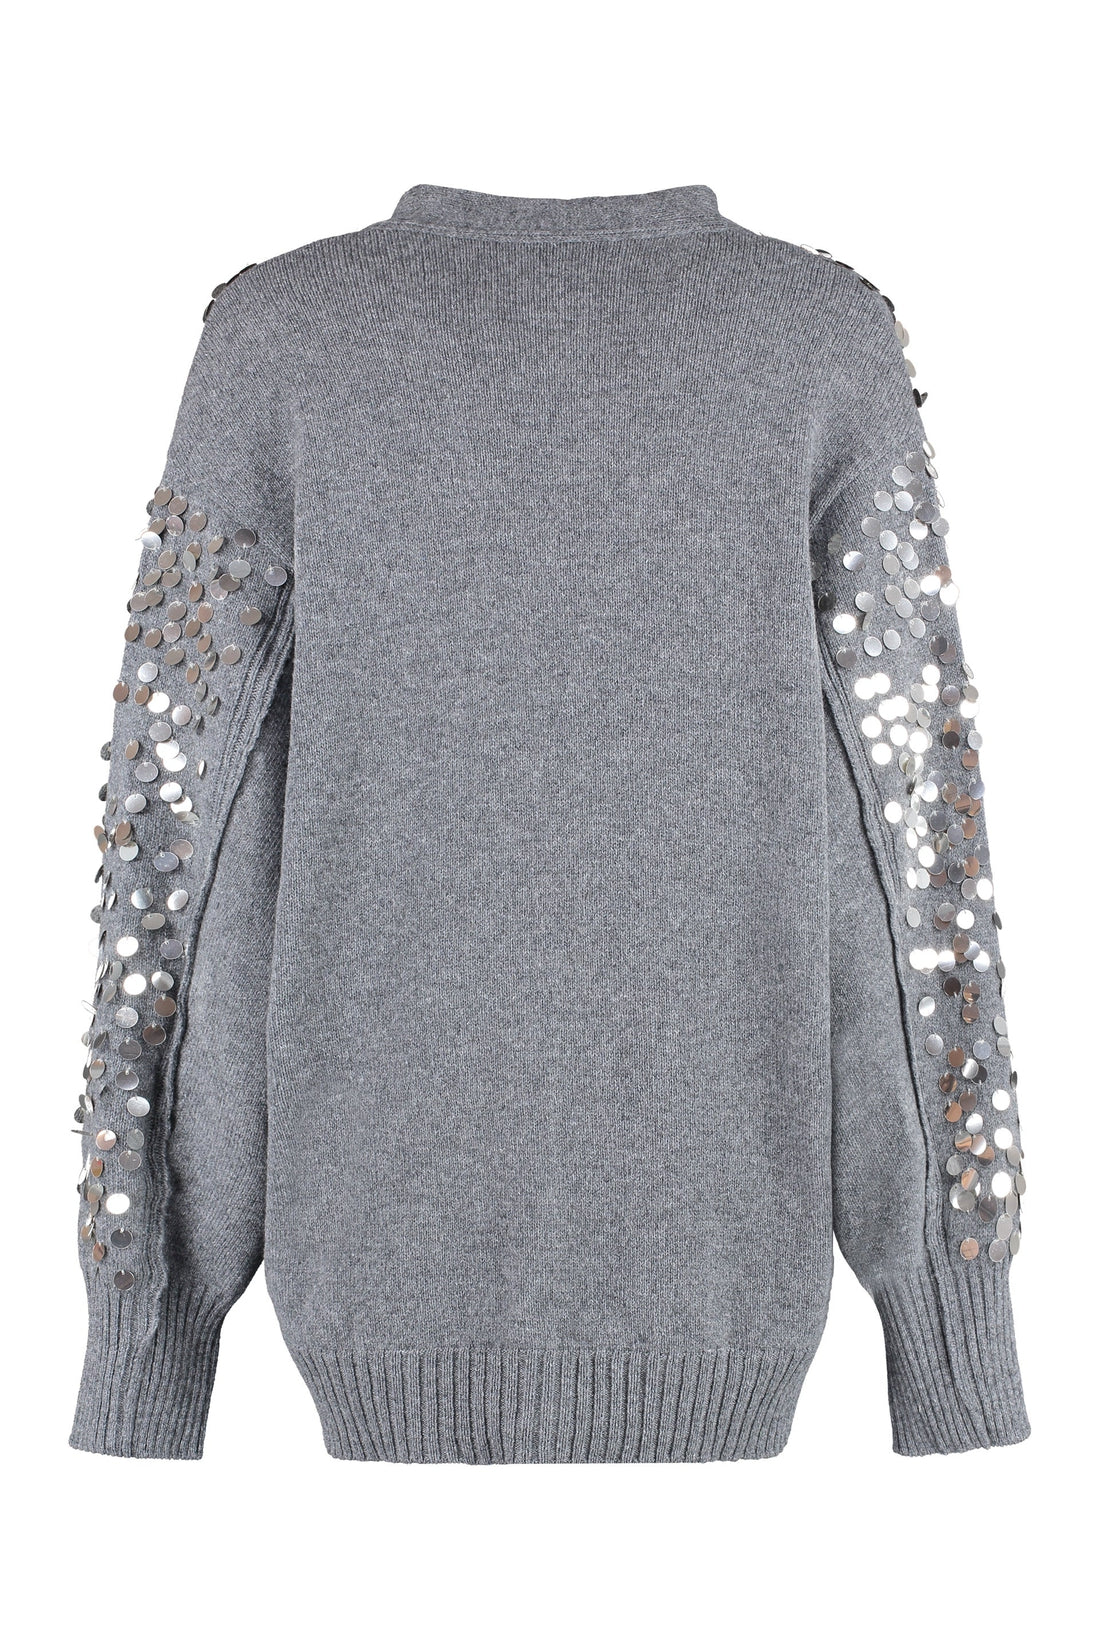 Philosophy di Lorenzo Serafini-OUTLET-SALE-Sequined wool cardigan-ARCHIVIST